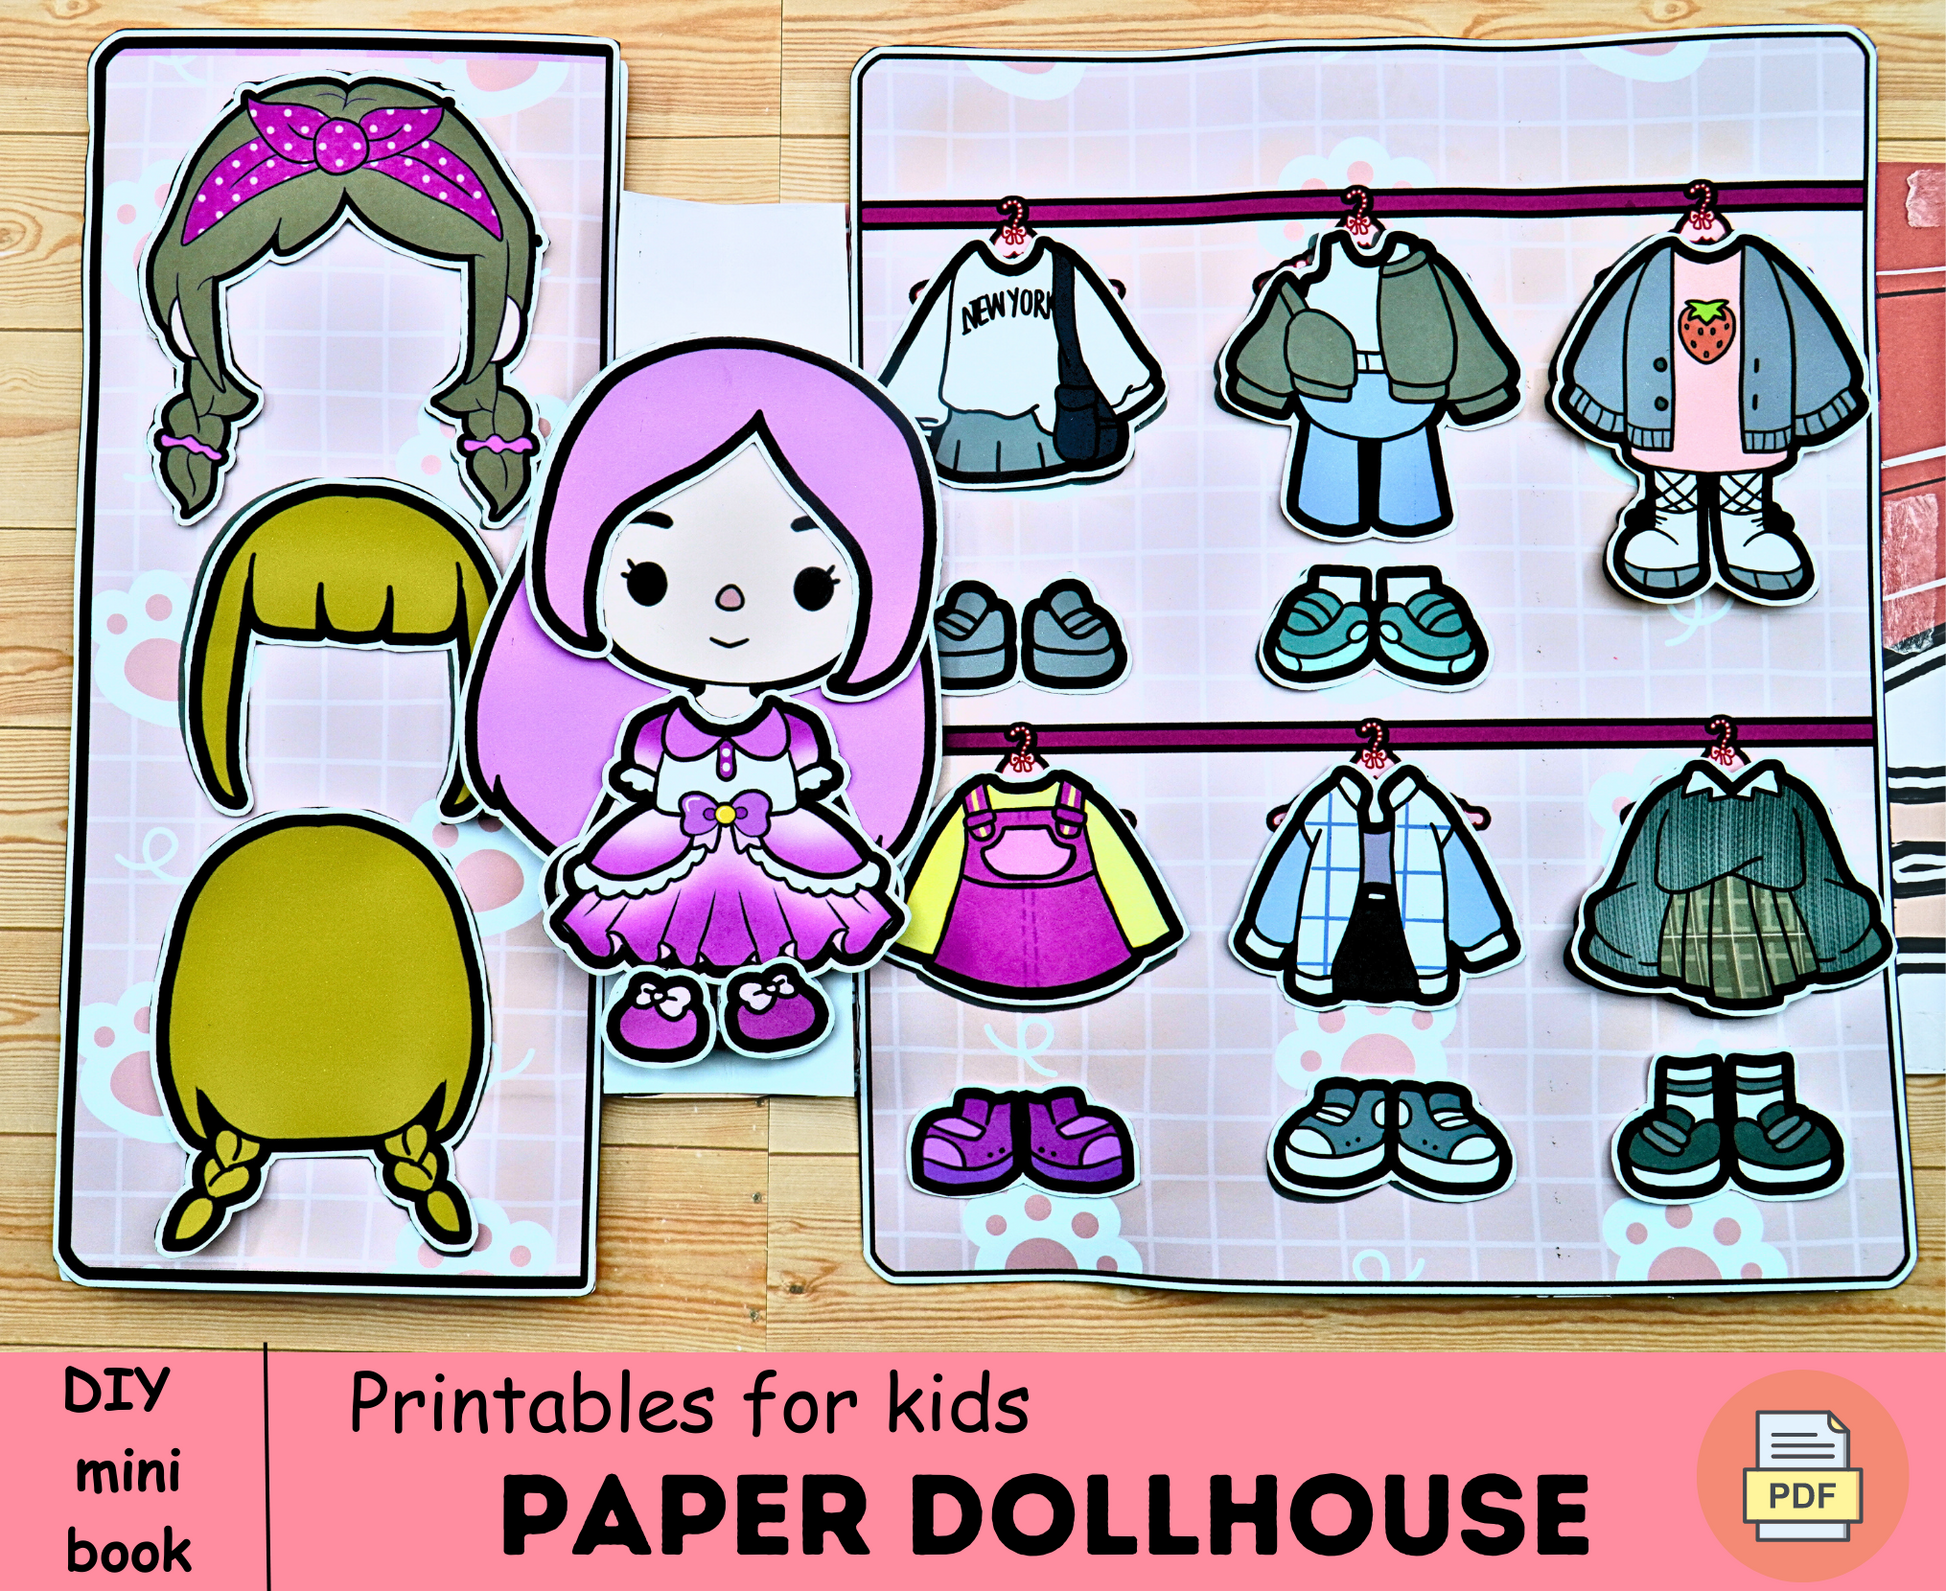 toca boca paper doll Outfit